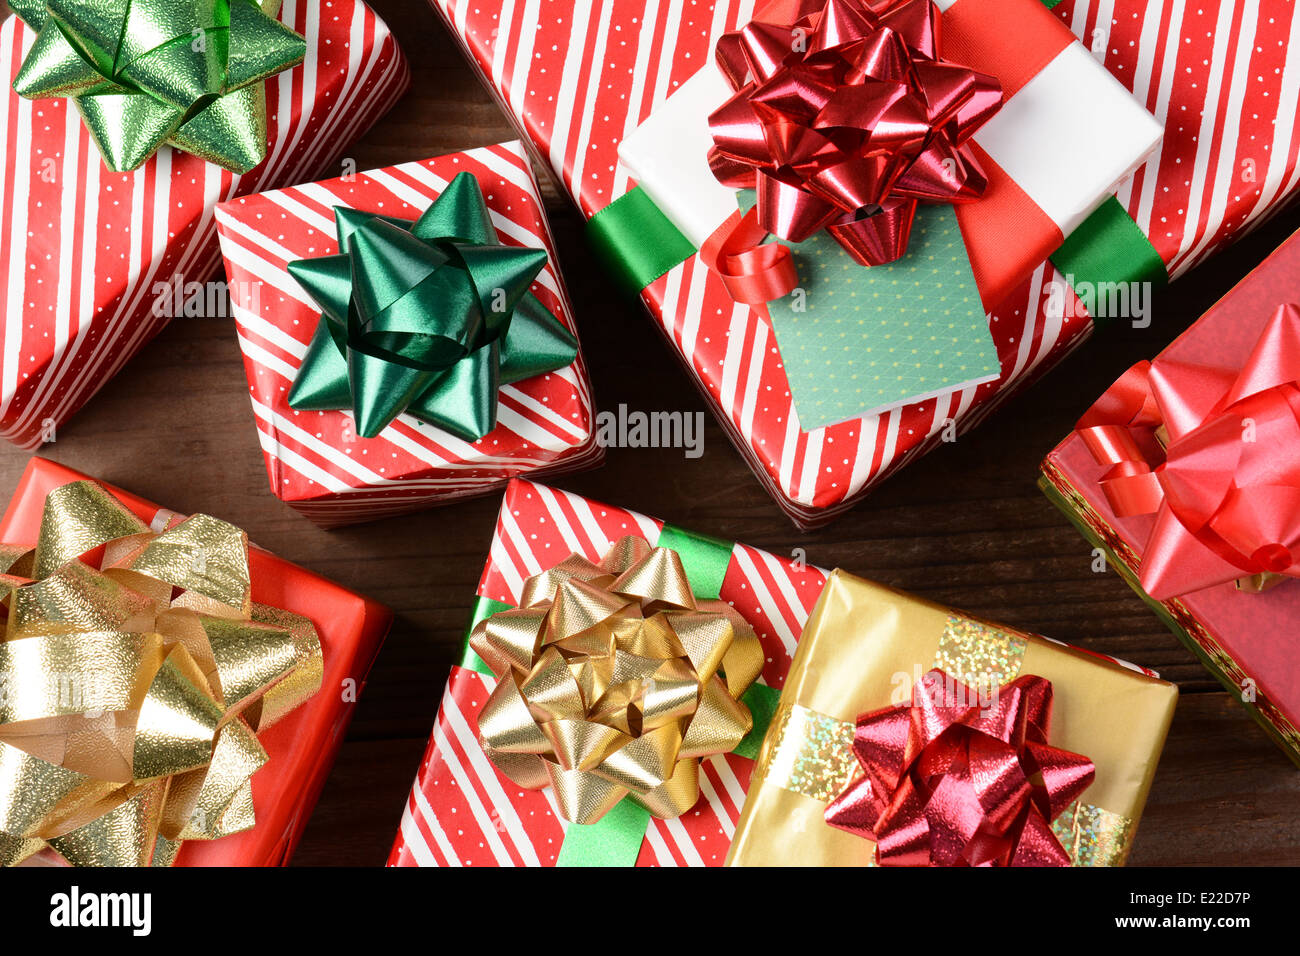 Overhead view of a group of wrapped Christmas presents. Horizontal format filling the frame. Stock Photo